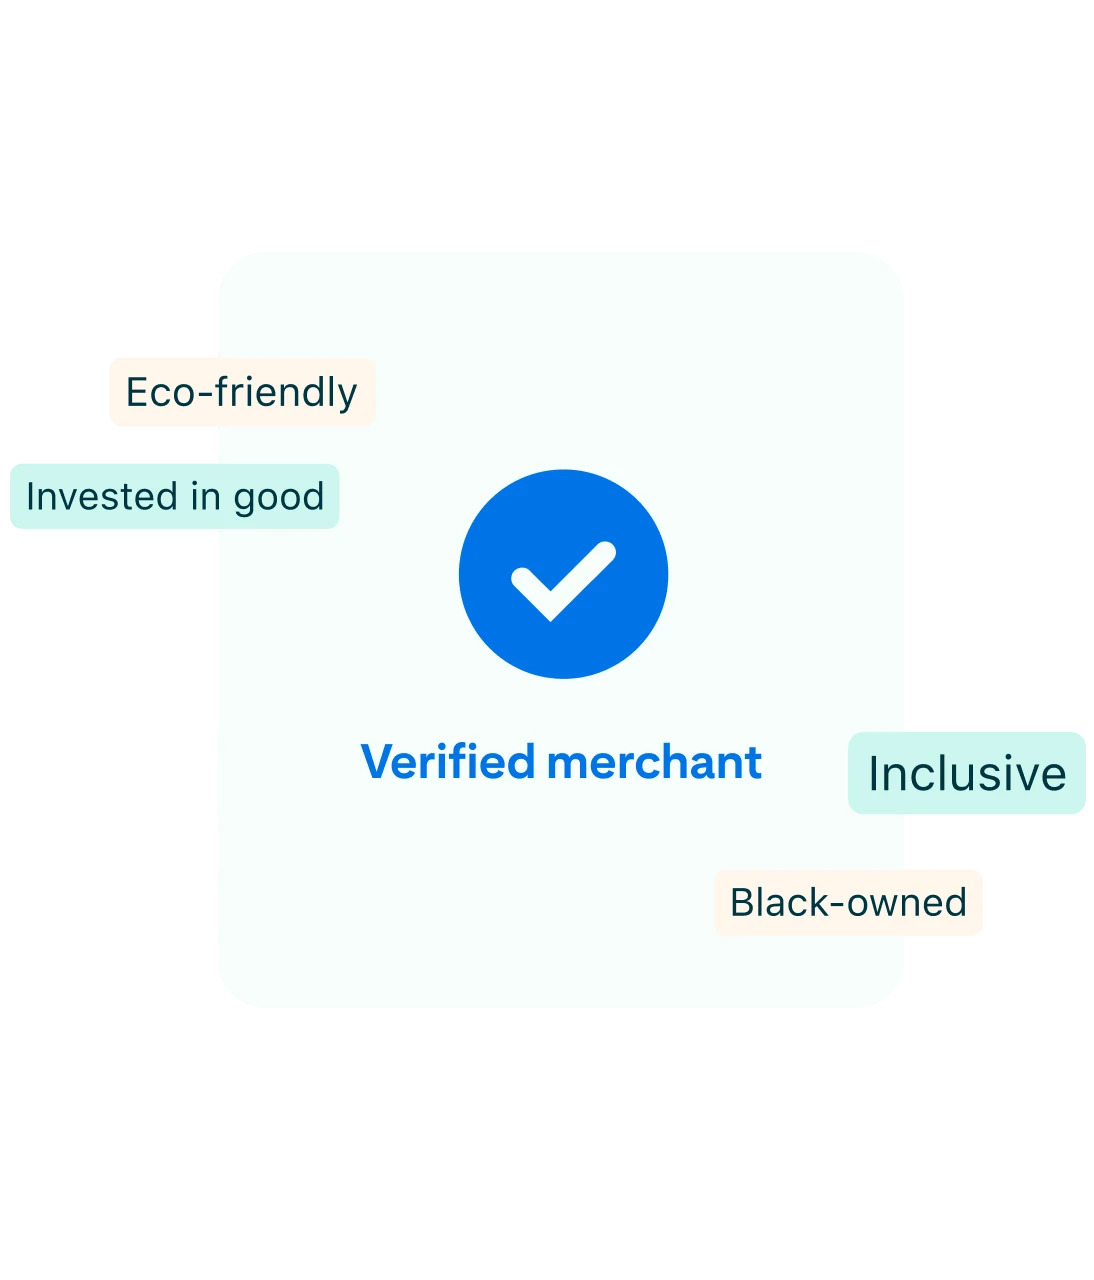 Image of Pinterest's verified merchant logo, surrounded by phrases on the left and right of the logo. On the left, from top to bottom, are the phrases ‘Eco-friendly’ and ‘Invested in good’. On the right, from top to bottom, are the phrases ‘Inclusive’ and ‘Black-owned’.